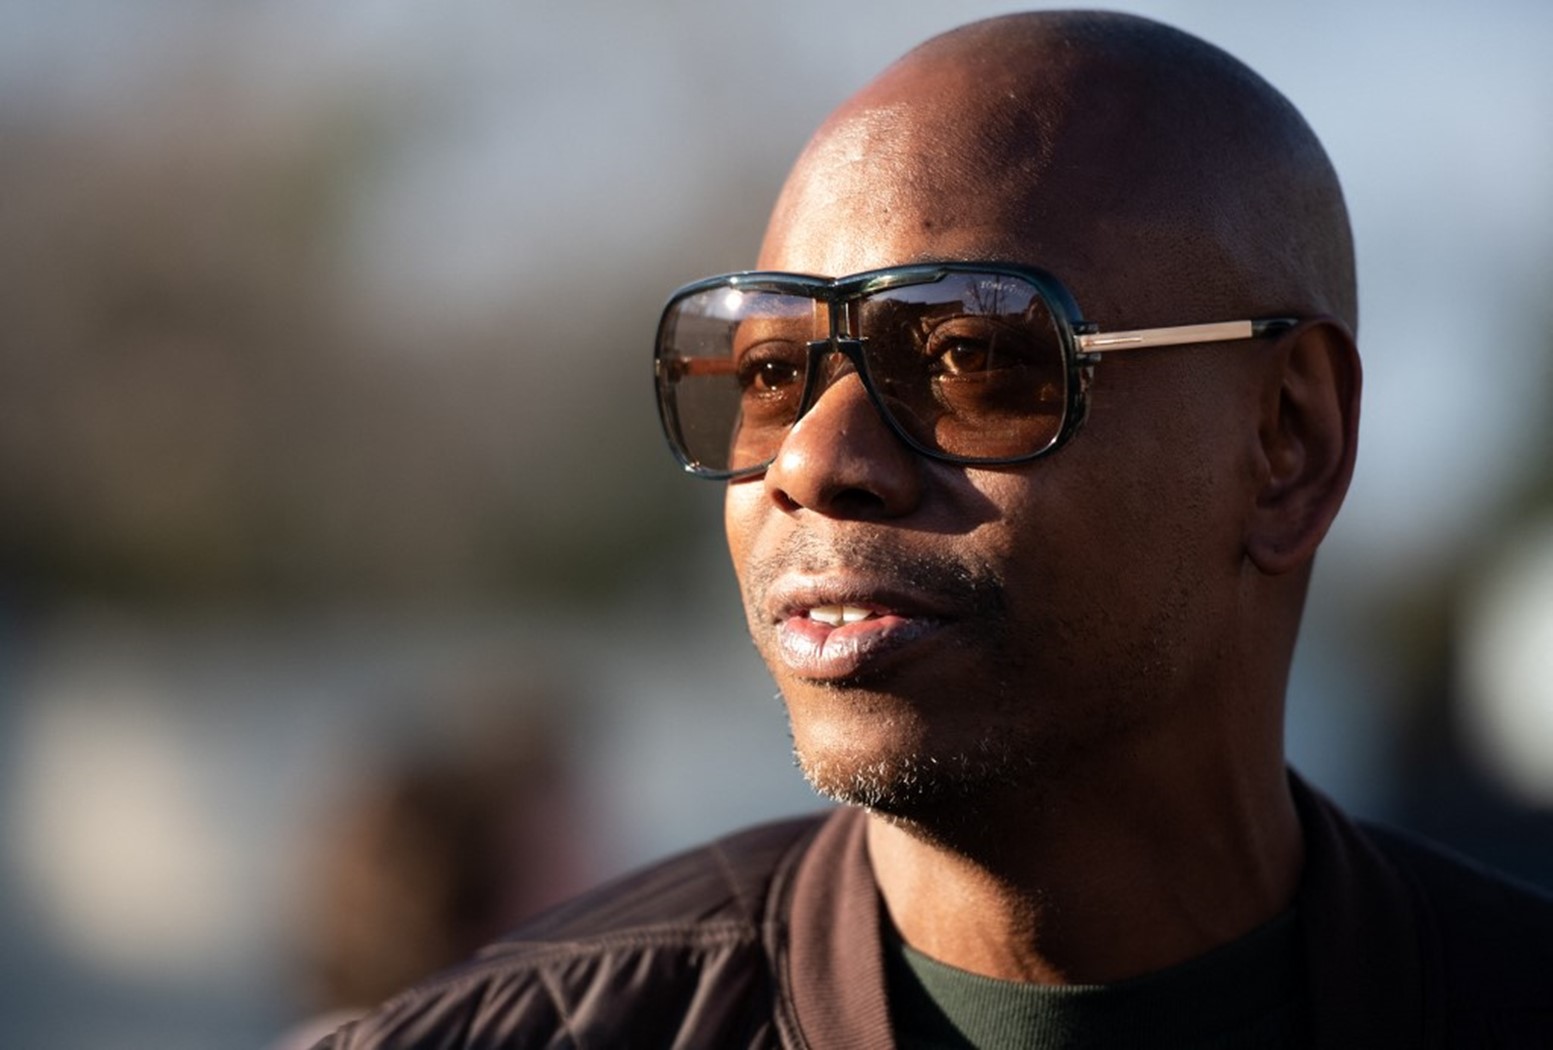 Report: Comedian Dave Chappelle attacked during LA show